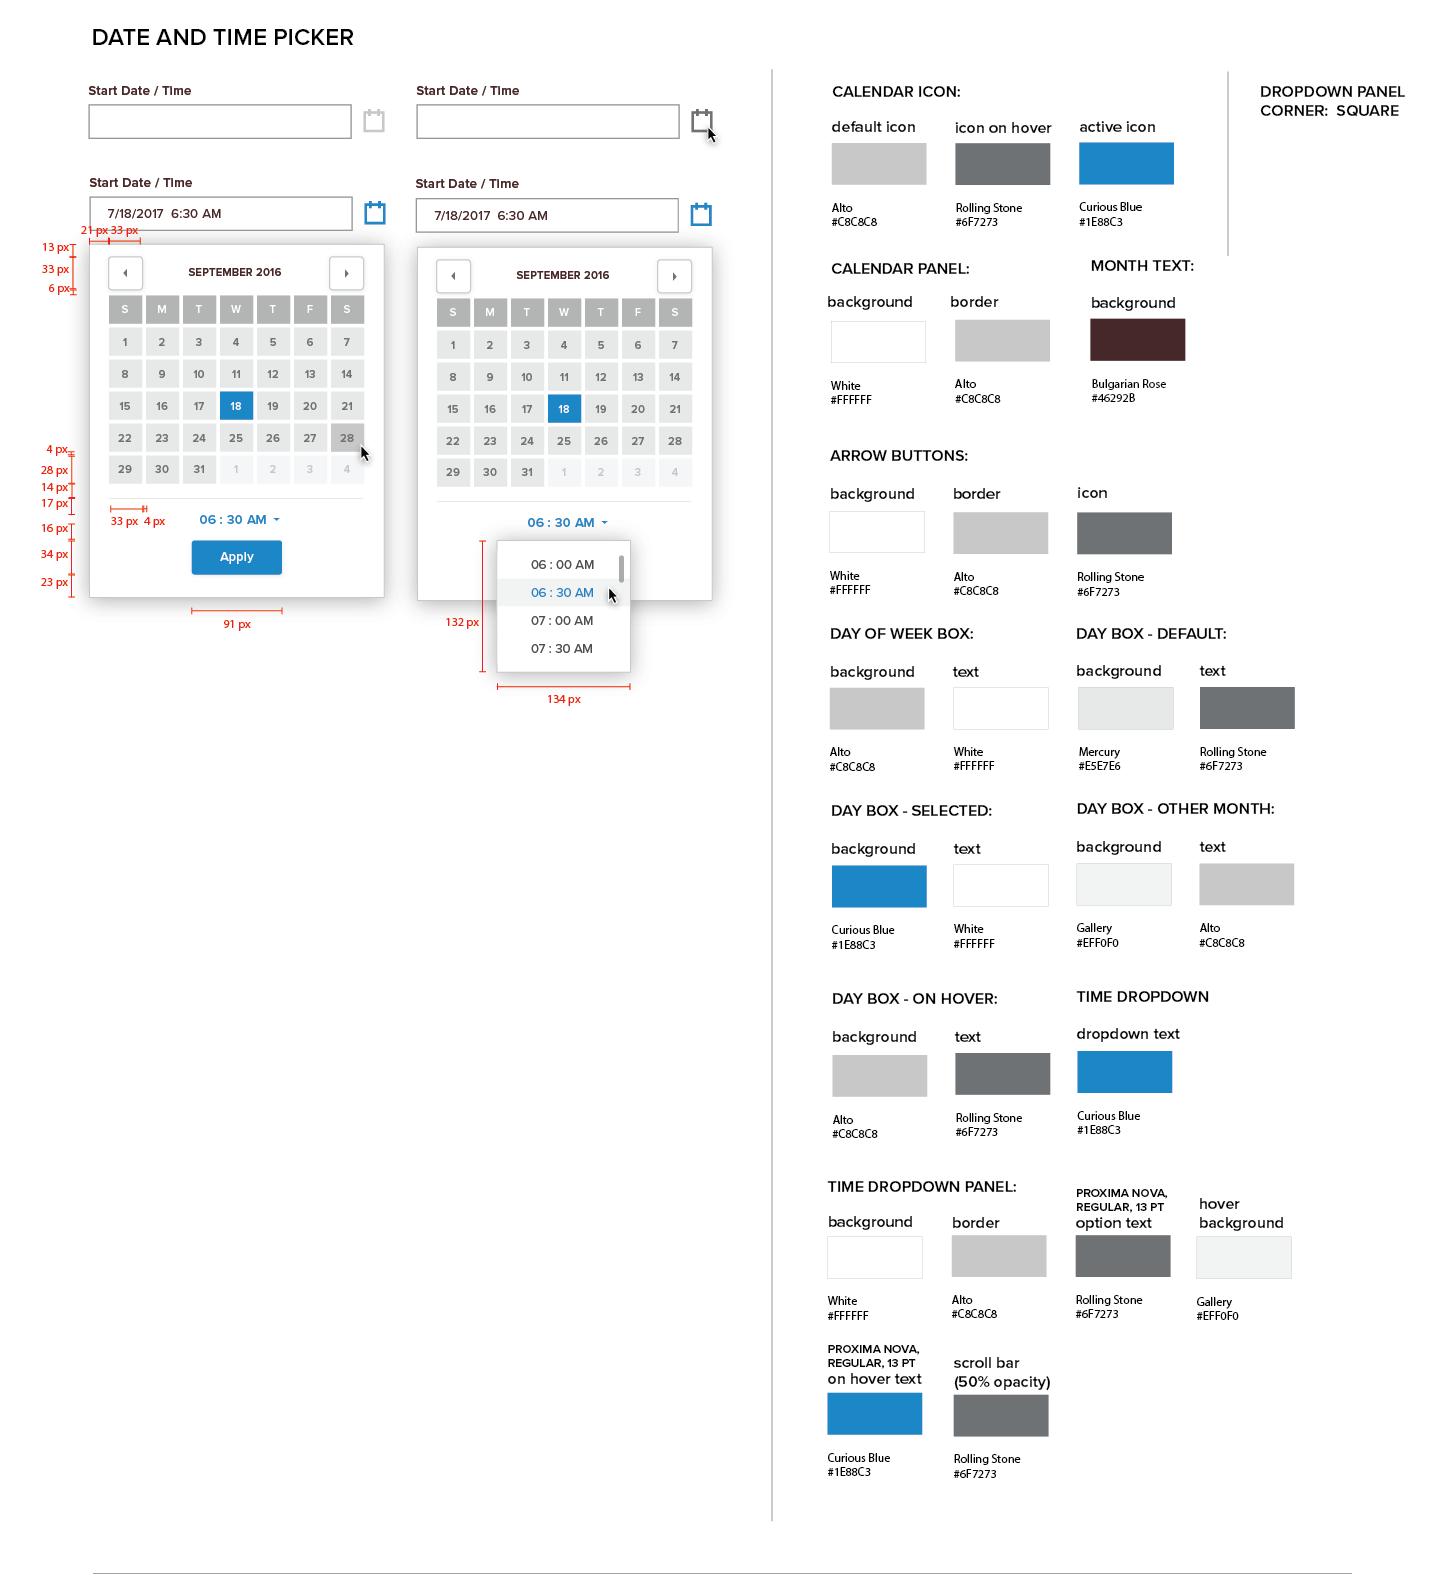 Persona Bar Style Guide - Date And Time Picker